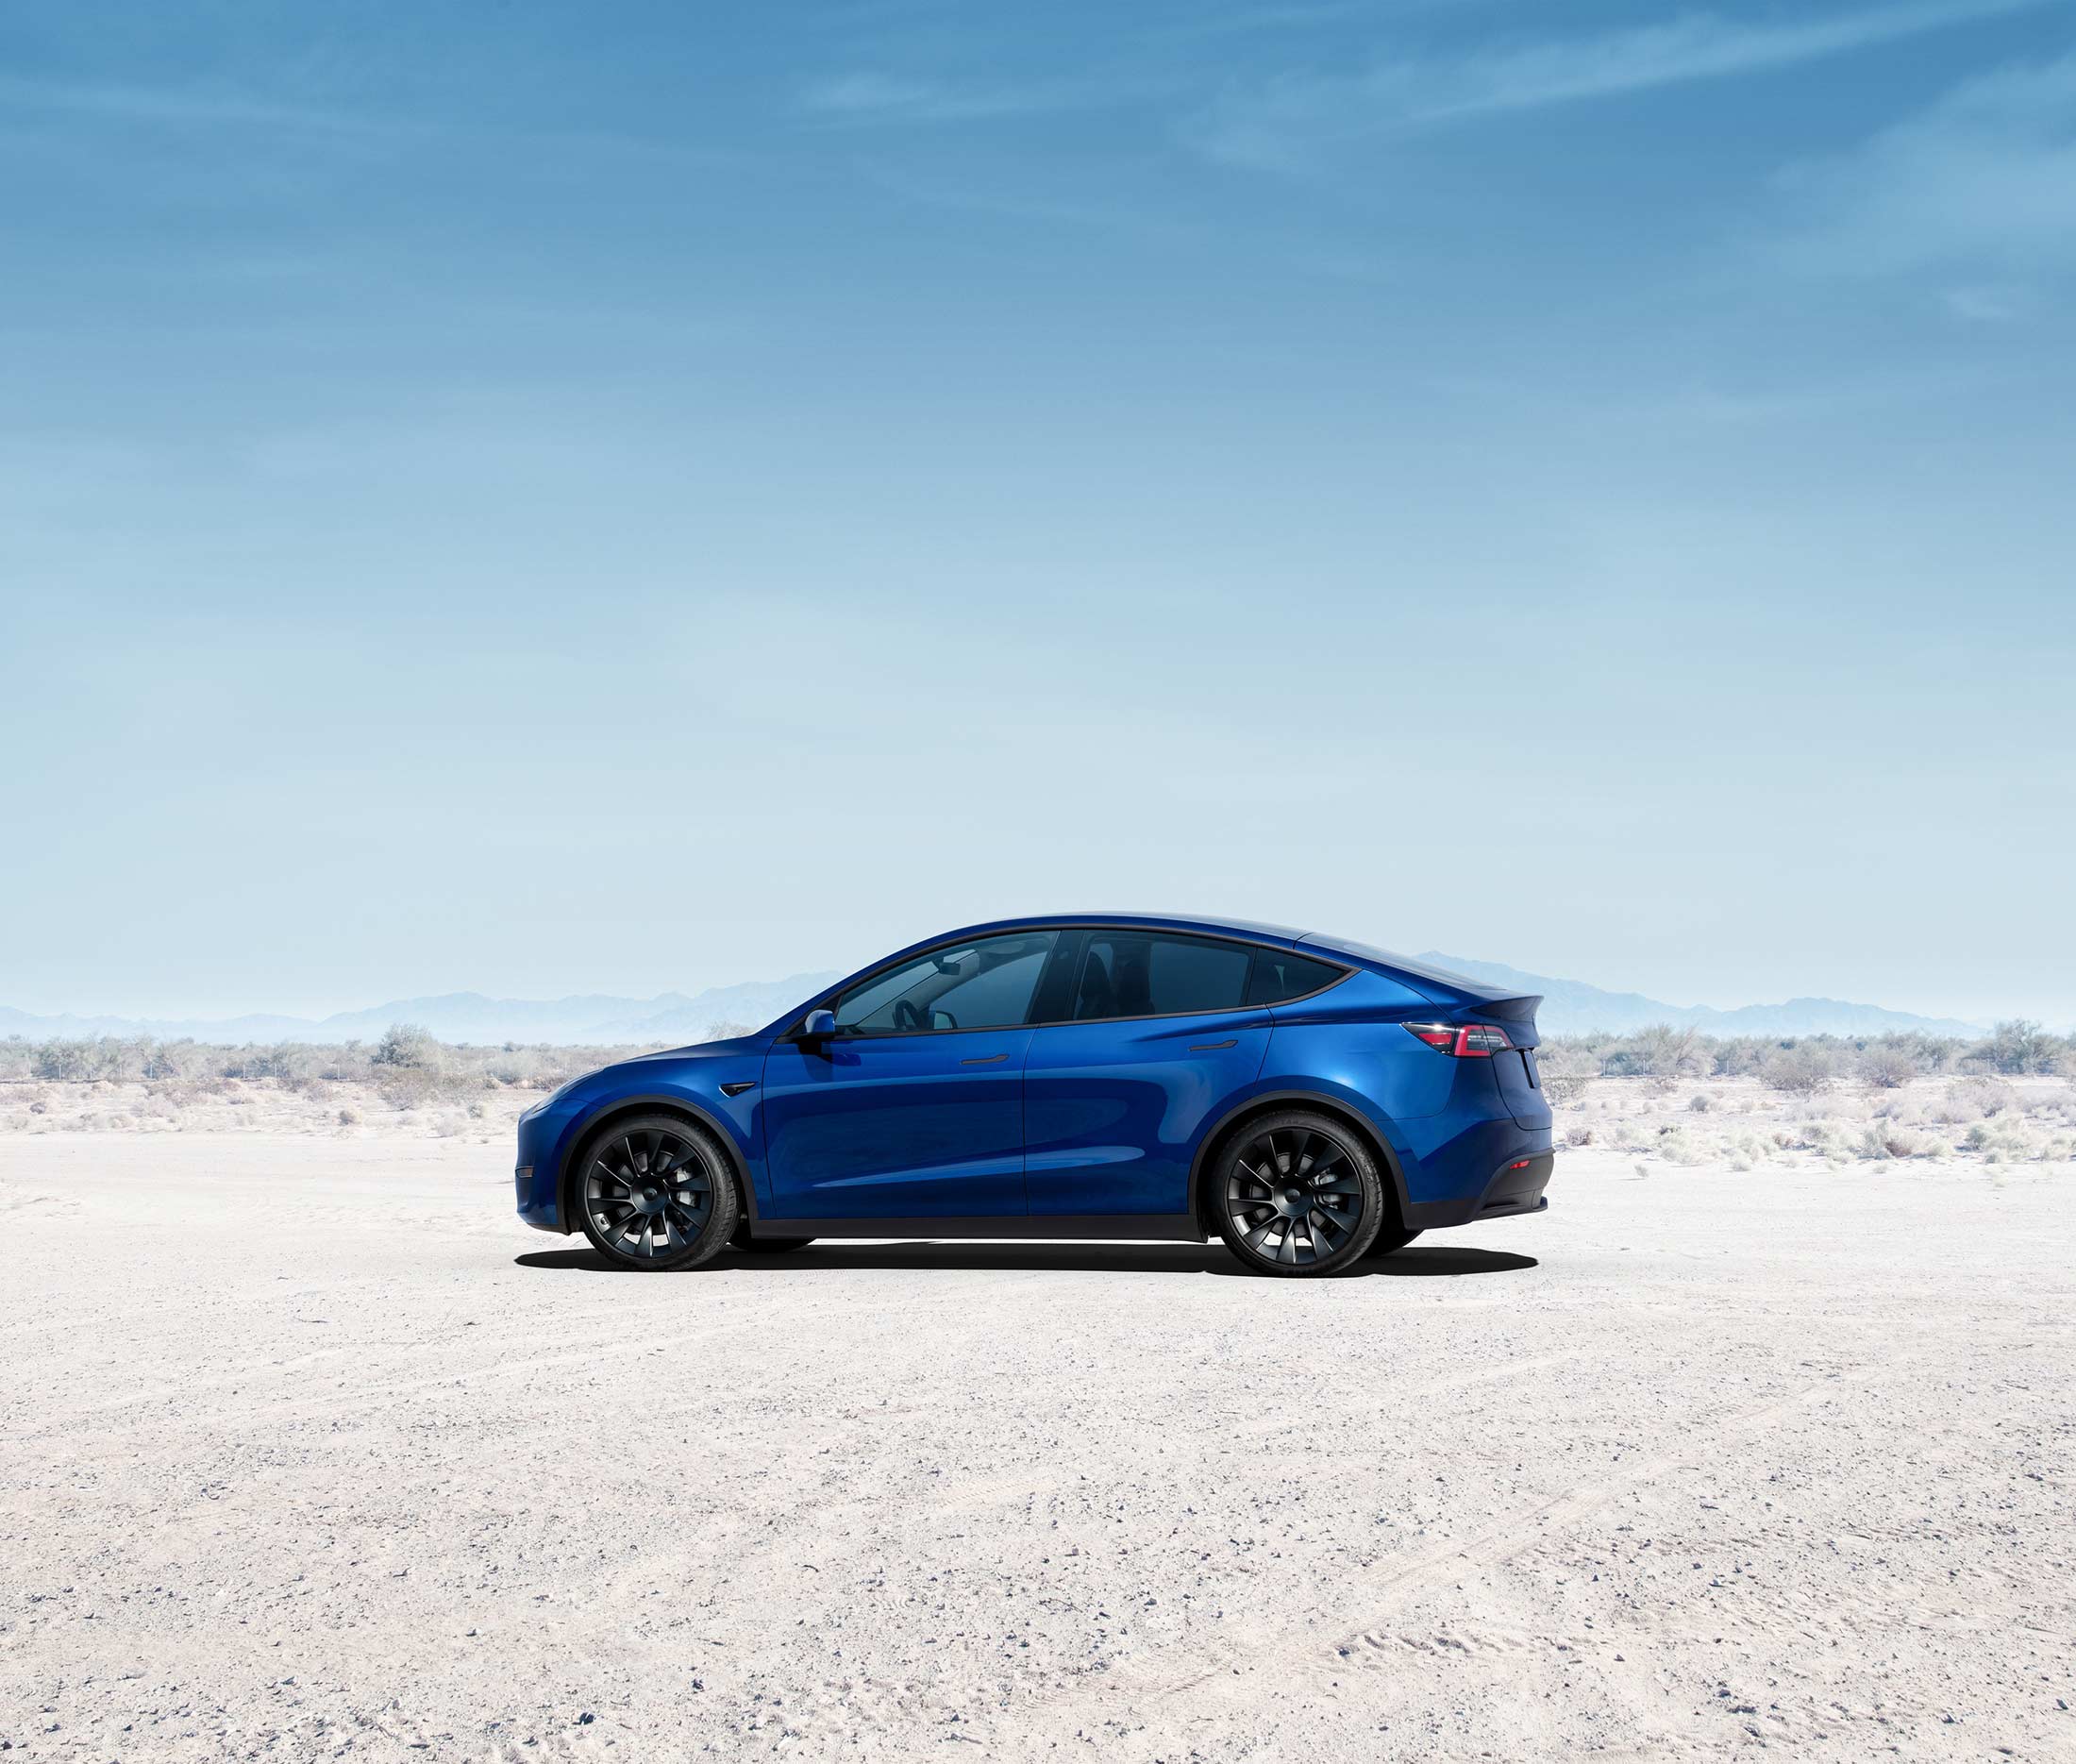 Tesla Model Y Price Cuts Mean Elon Musk's Either Disruptive or Desperate -  Bloomberg